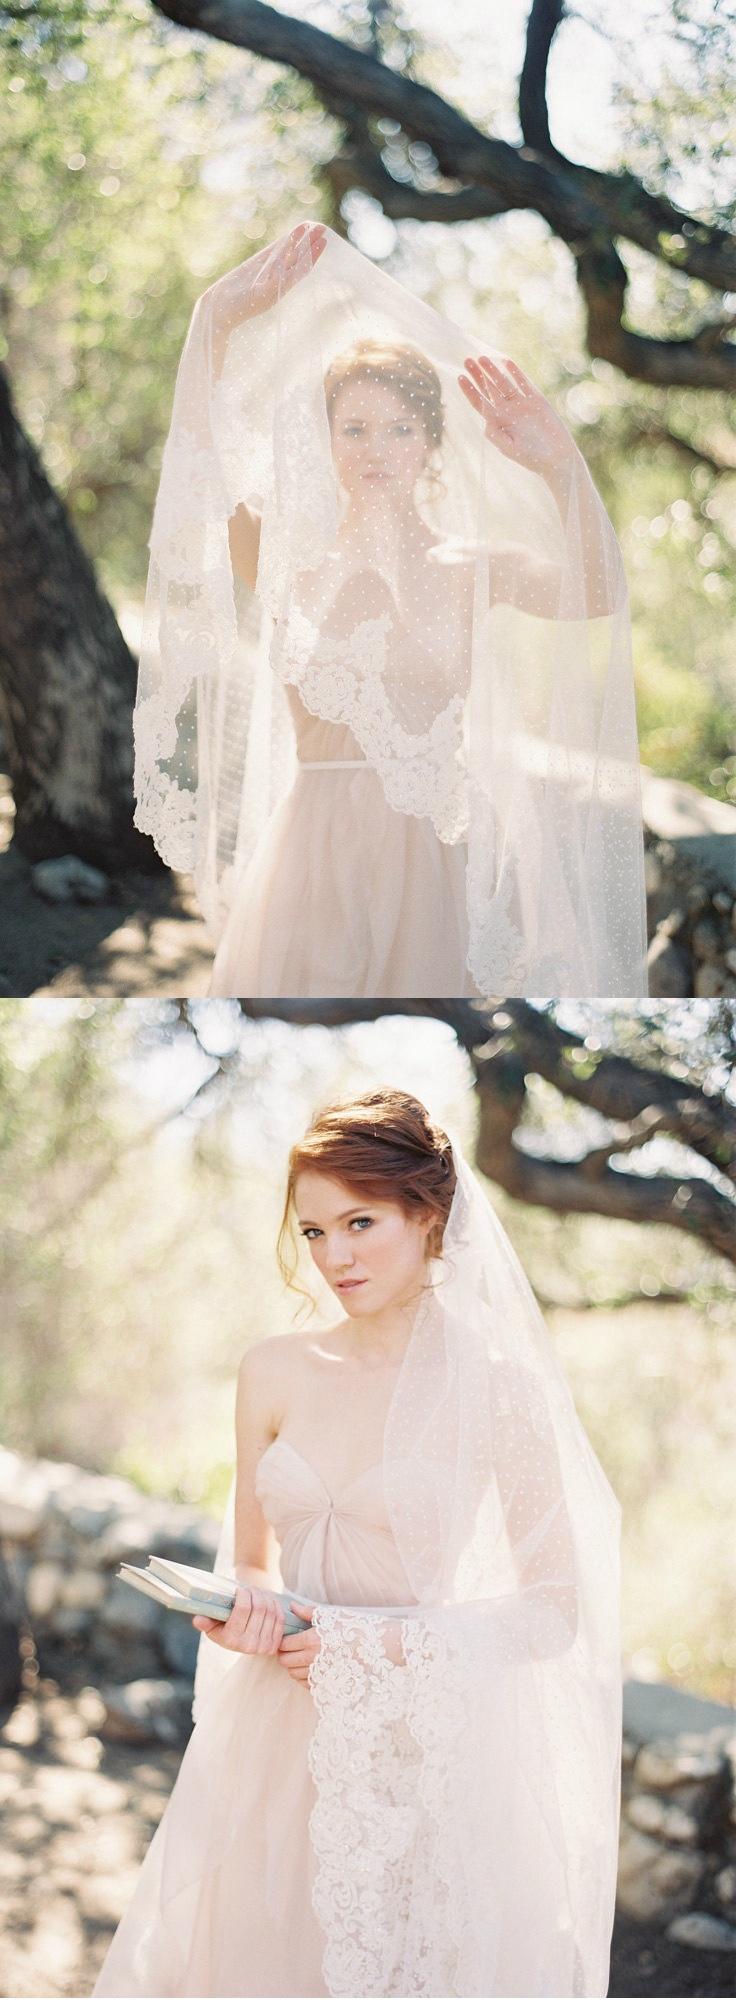 Wedding - Circular Ivory Wedding Bridal Veil With Polka Dots And Beaded Lace, Dotted Blusher Veil - Allure